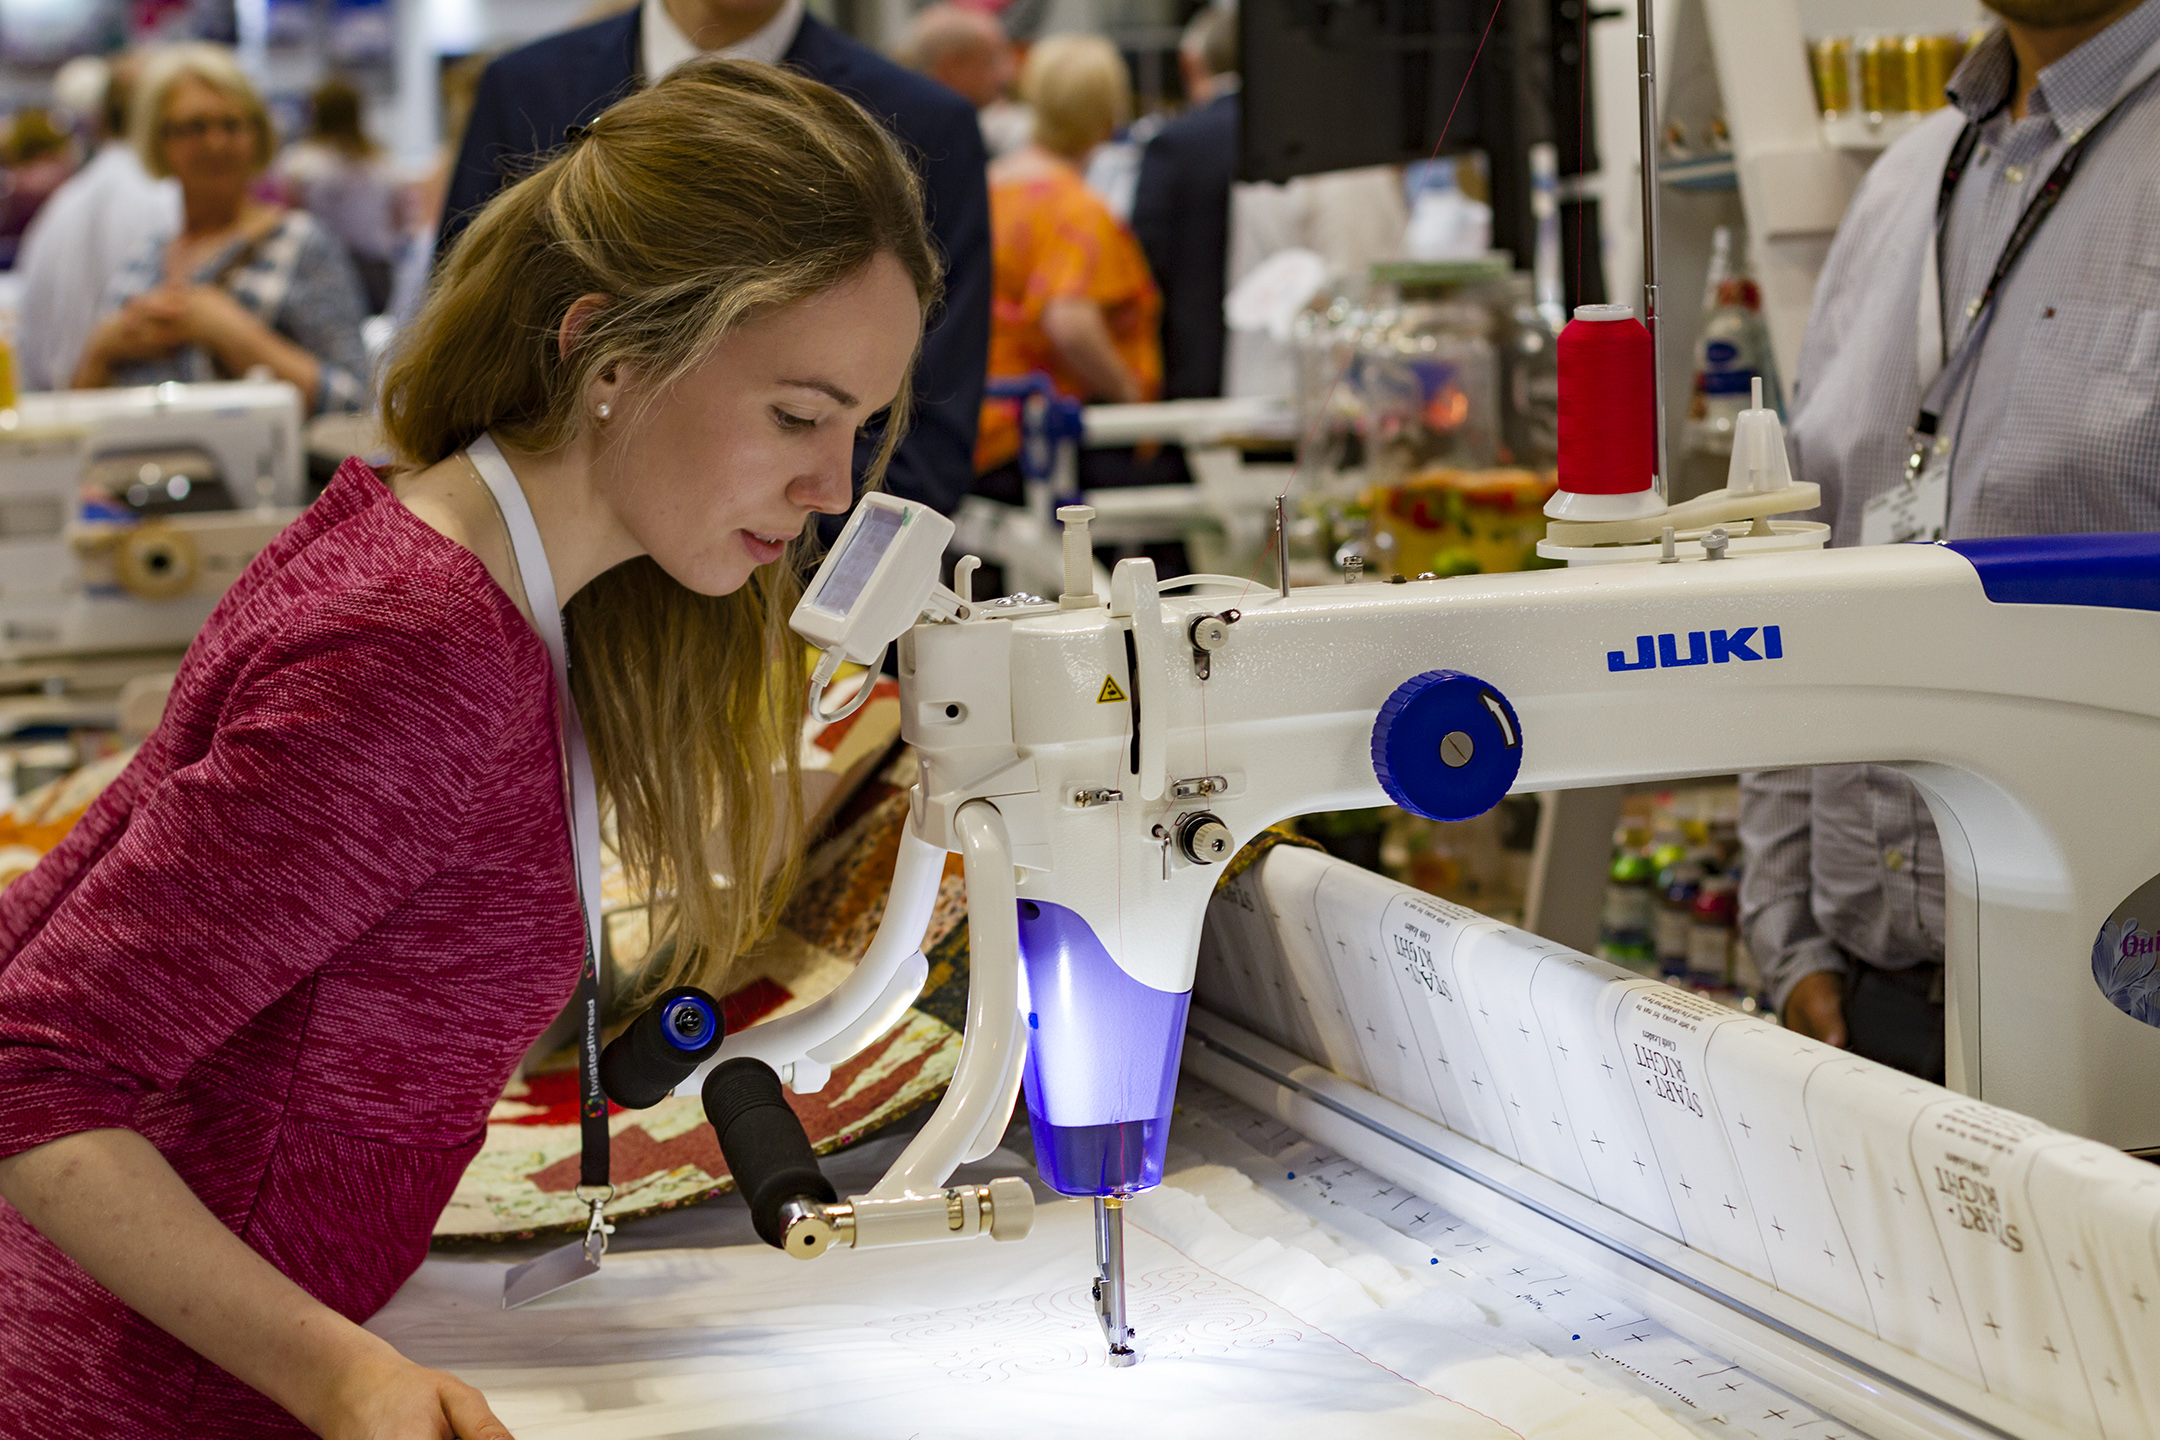 Try out the Juki Sewing Machines at the Festival of Quilts